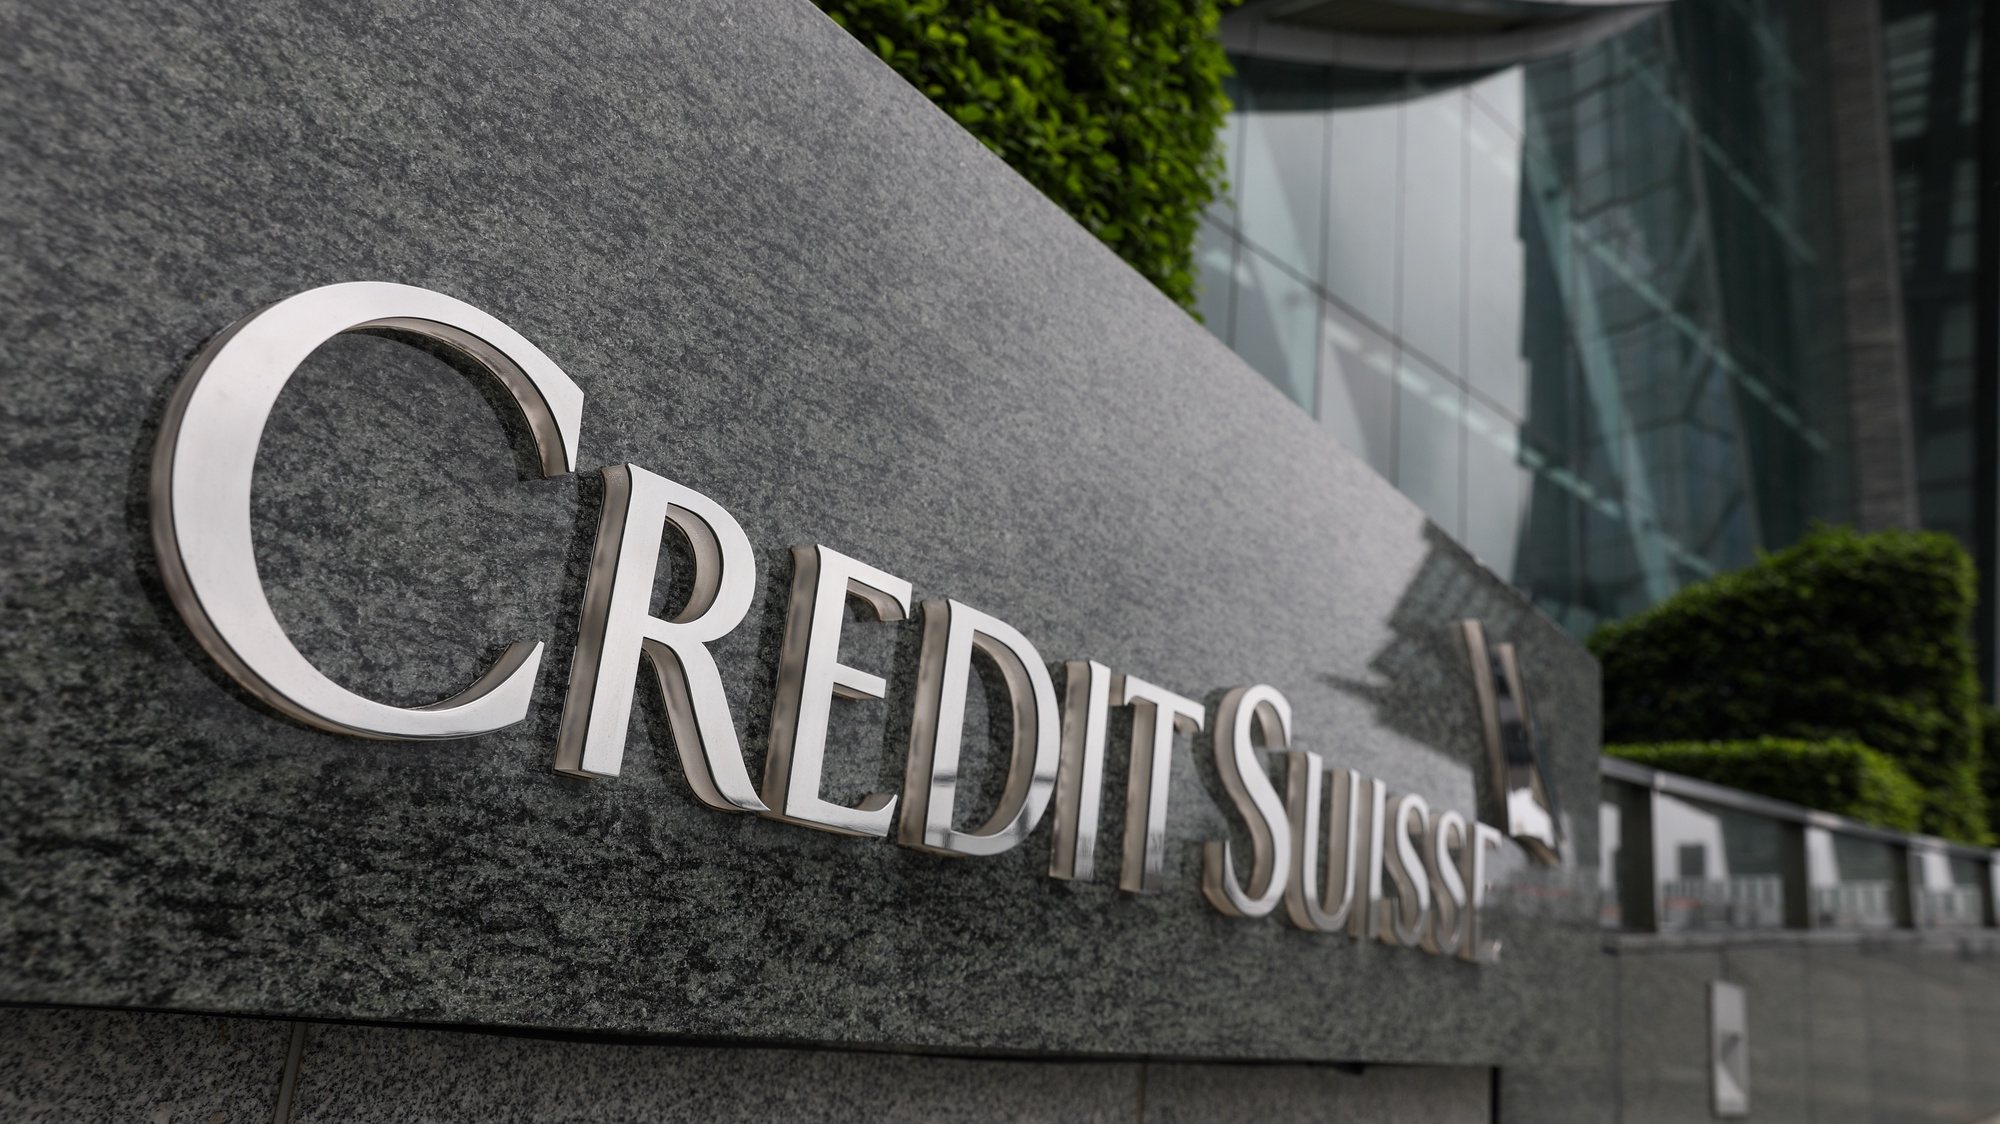 epa10536141 The logo of Credit Suisse is displayed outside International Commerce Centre in Hong Kong, China, 22 March 2023. The Hong Kong Monetary Authority said Credit Suisseâ€™s assets in Hong Kong made up 0.5 percent of the banking systemâ€™s total assets. Credit Suisse was purchased by rival UBS for over 3 billion US dollar after the collapse of the Switzerland-based investment bank.  EPA/JEROME FAVRE